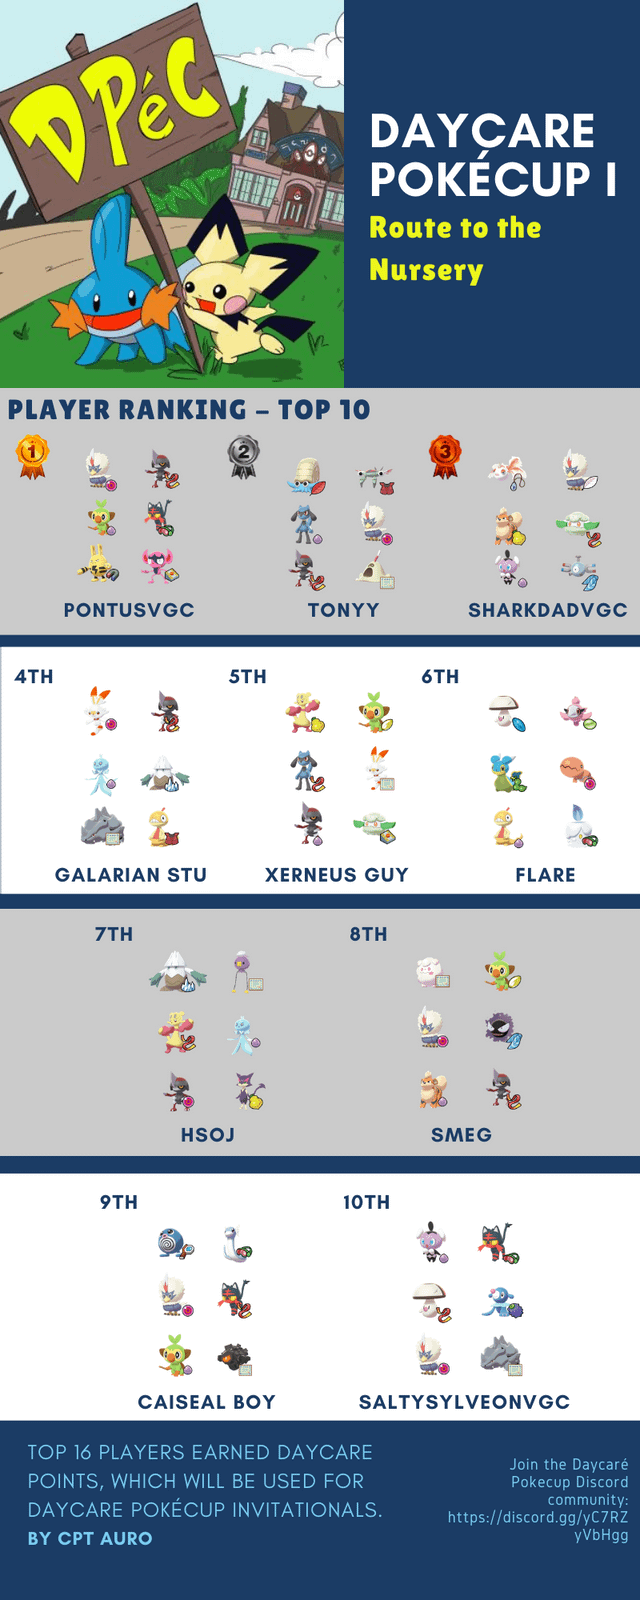 vgc series 2 tournament results